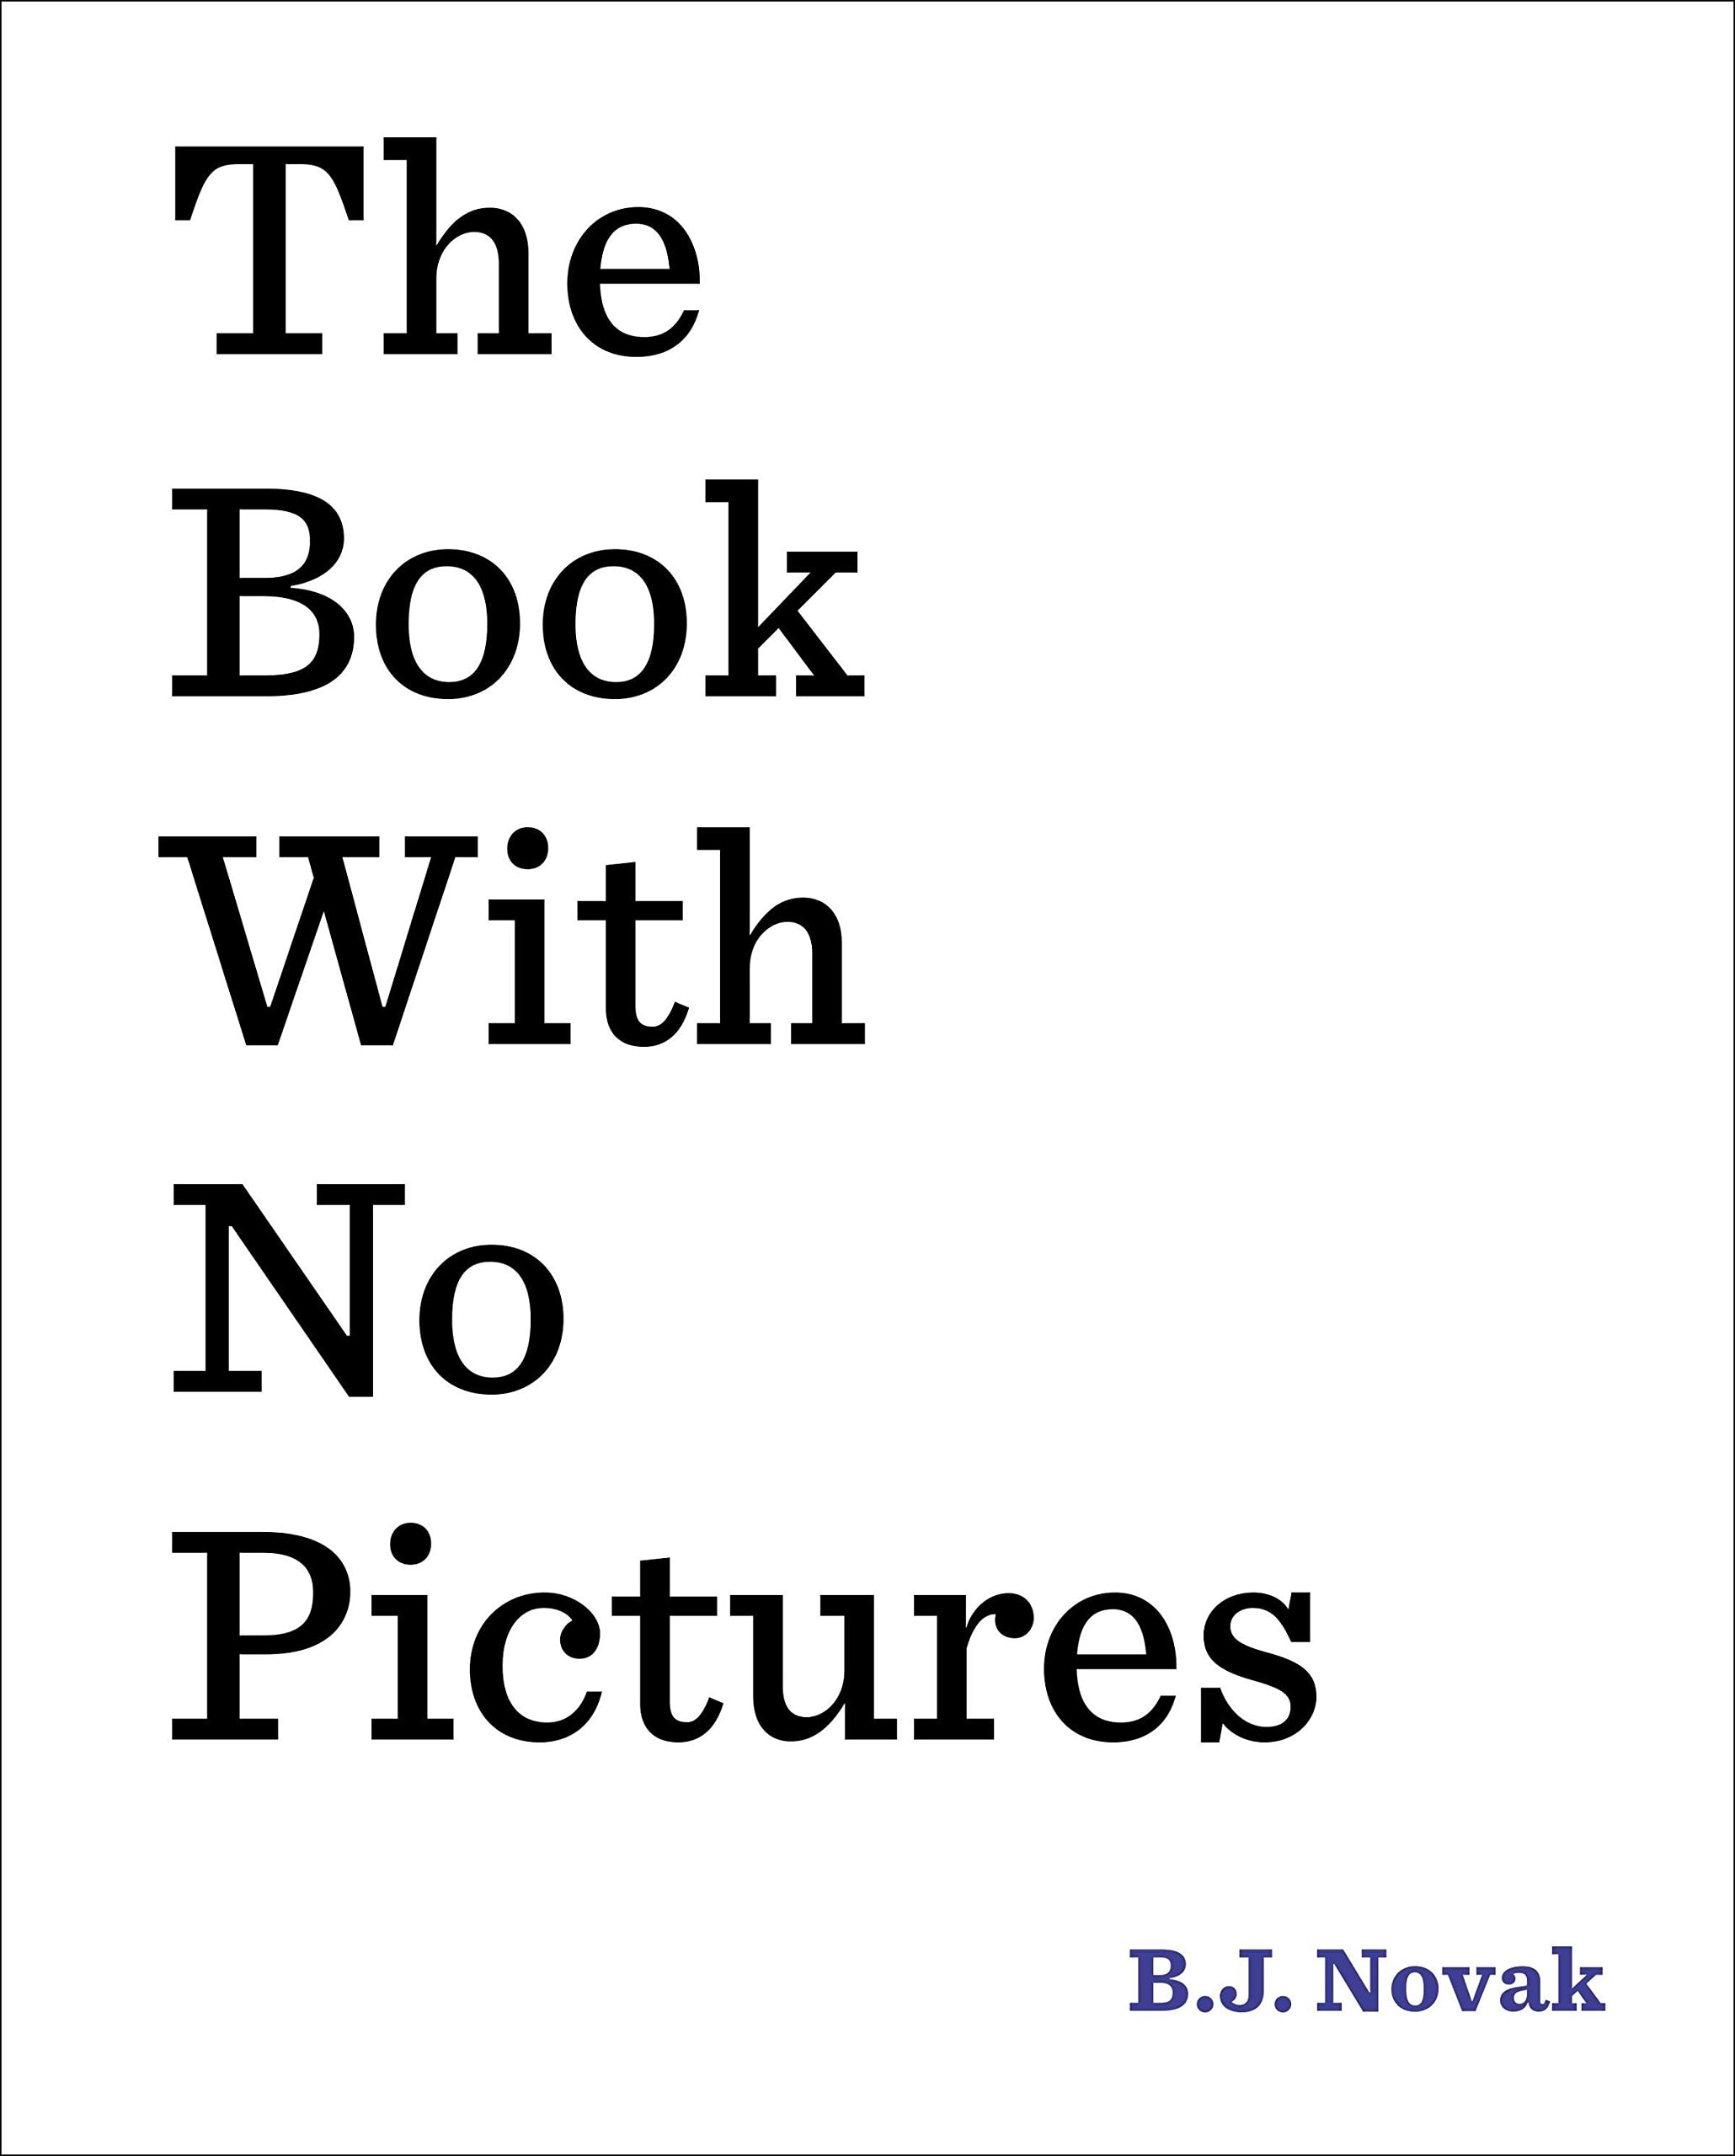 "The Book with No Pictures" by B. J. Novak